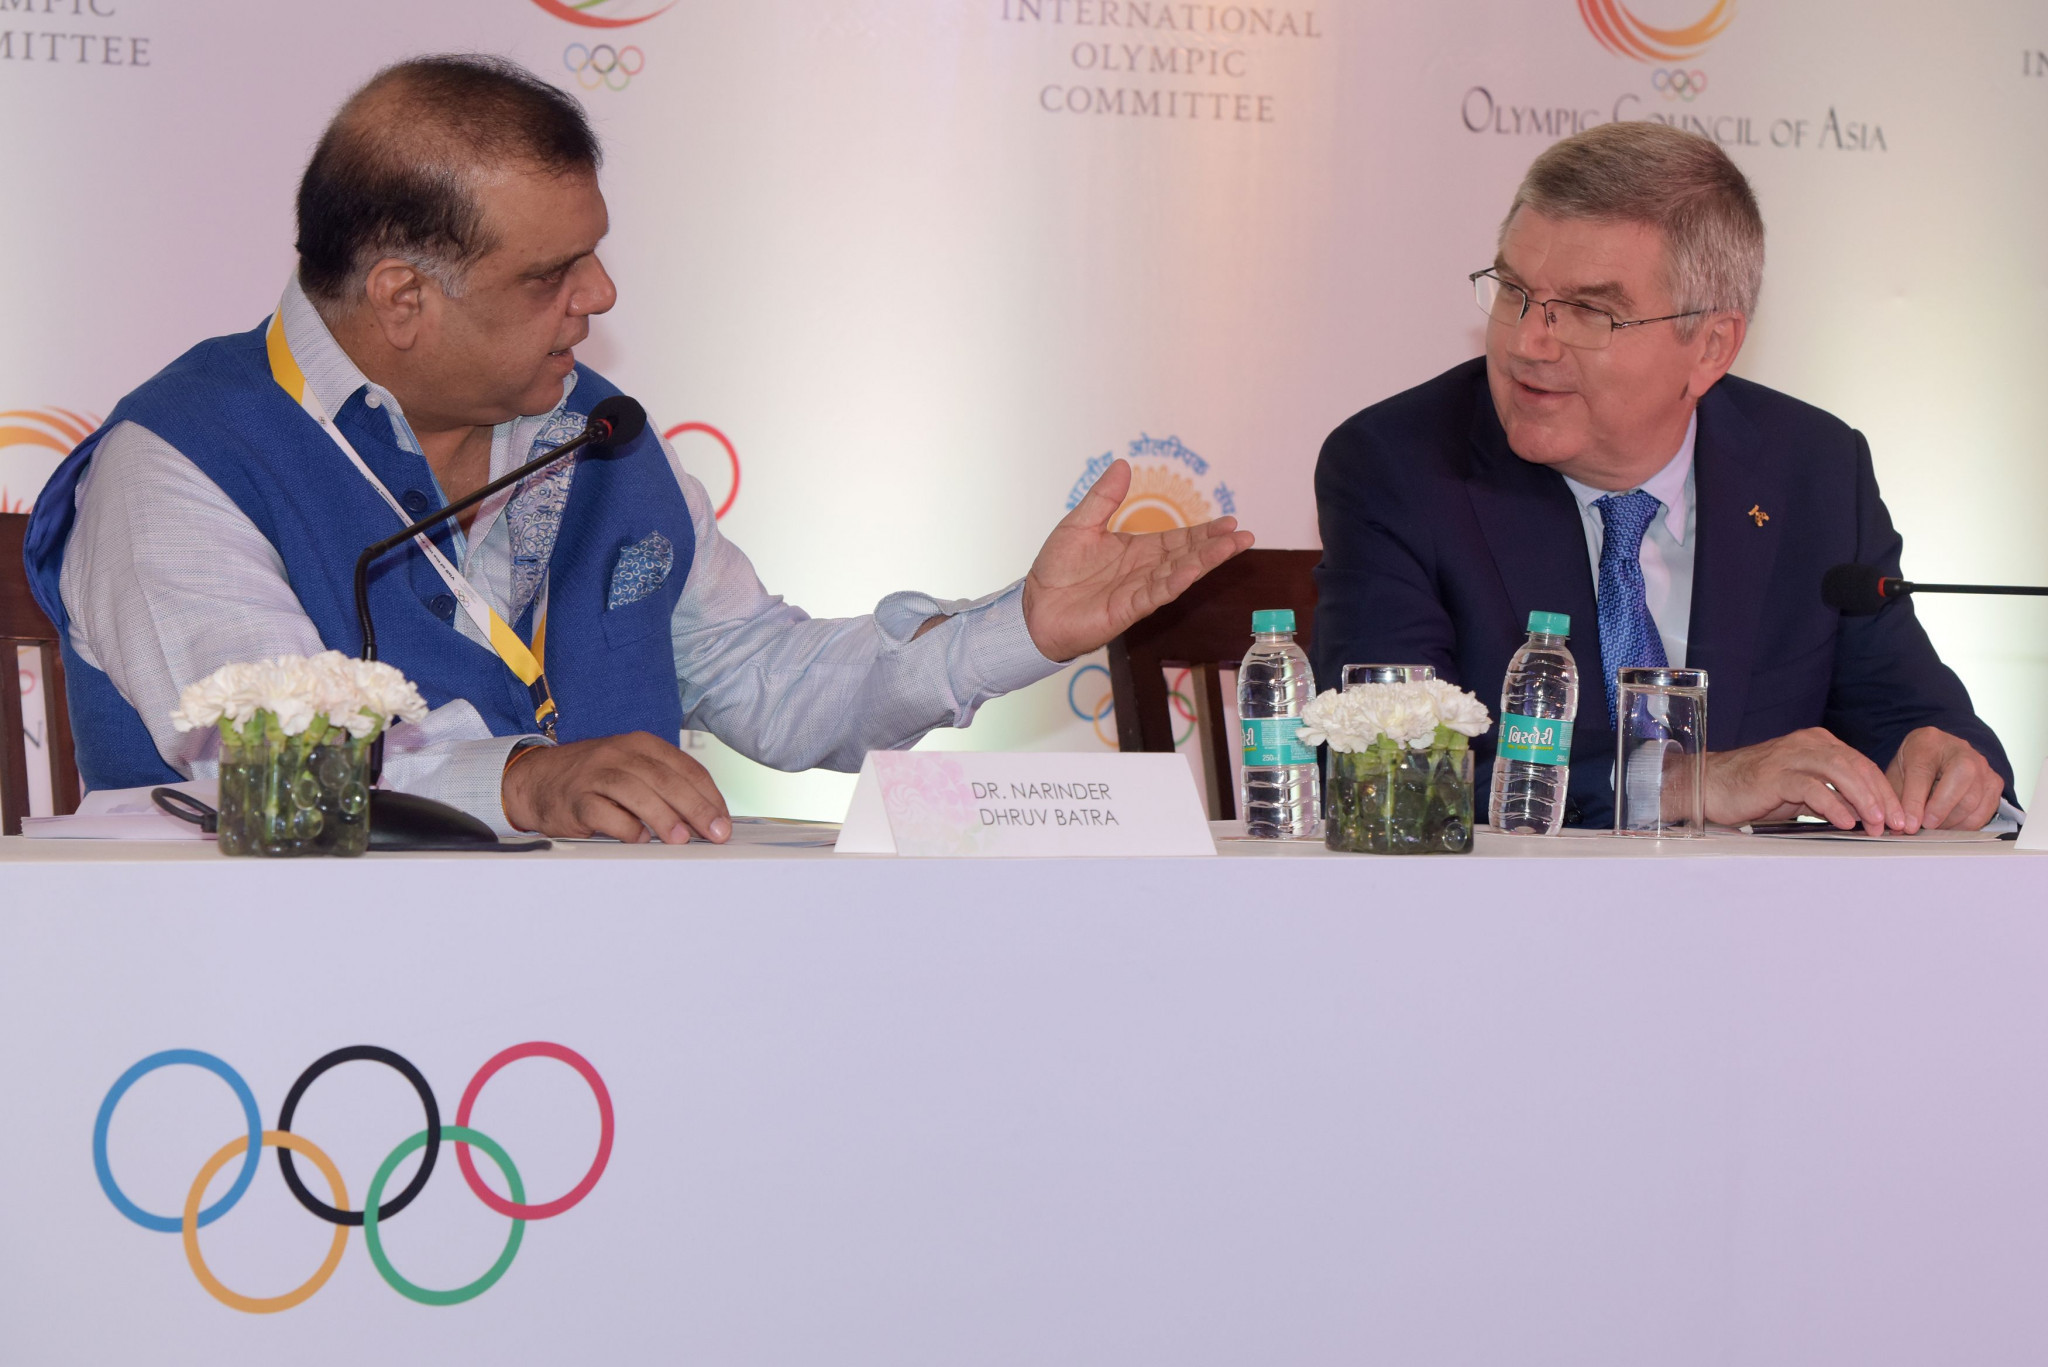 India submitted a letter of interest to the IOC in December 2018 ©Getty Images